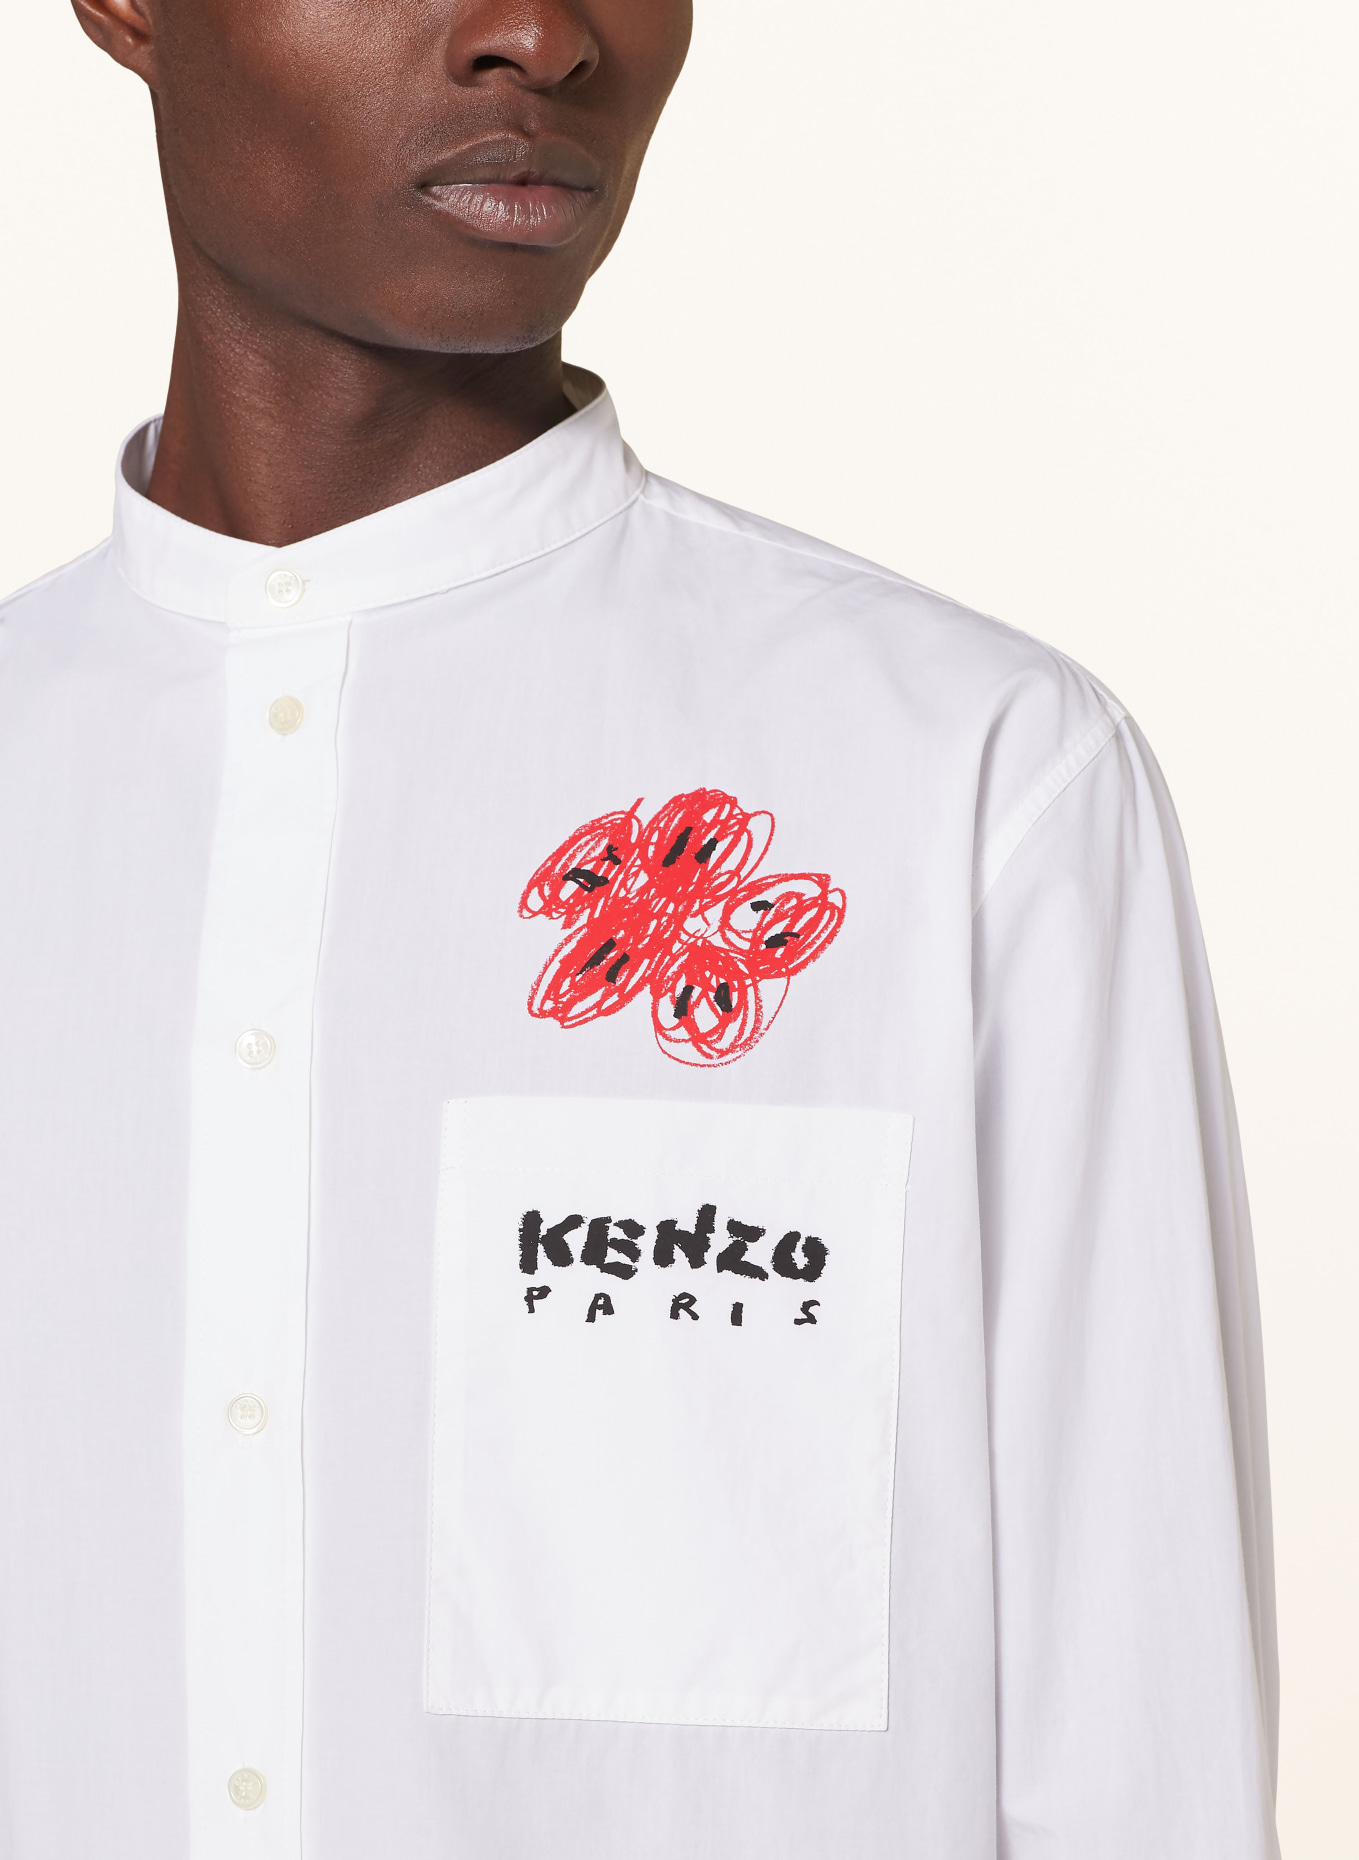 KENZO Shirt regular fit with stand-up collar, Color: WHITE/ RED/ BLACK (Image 4)